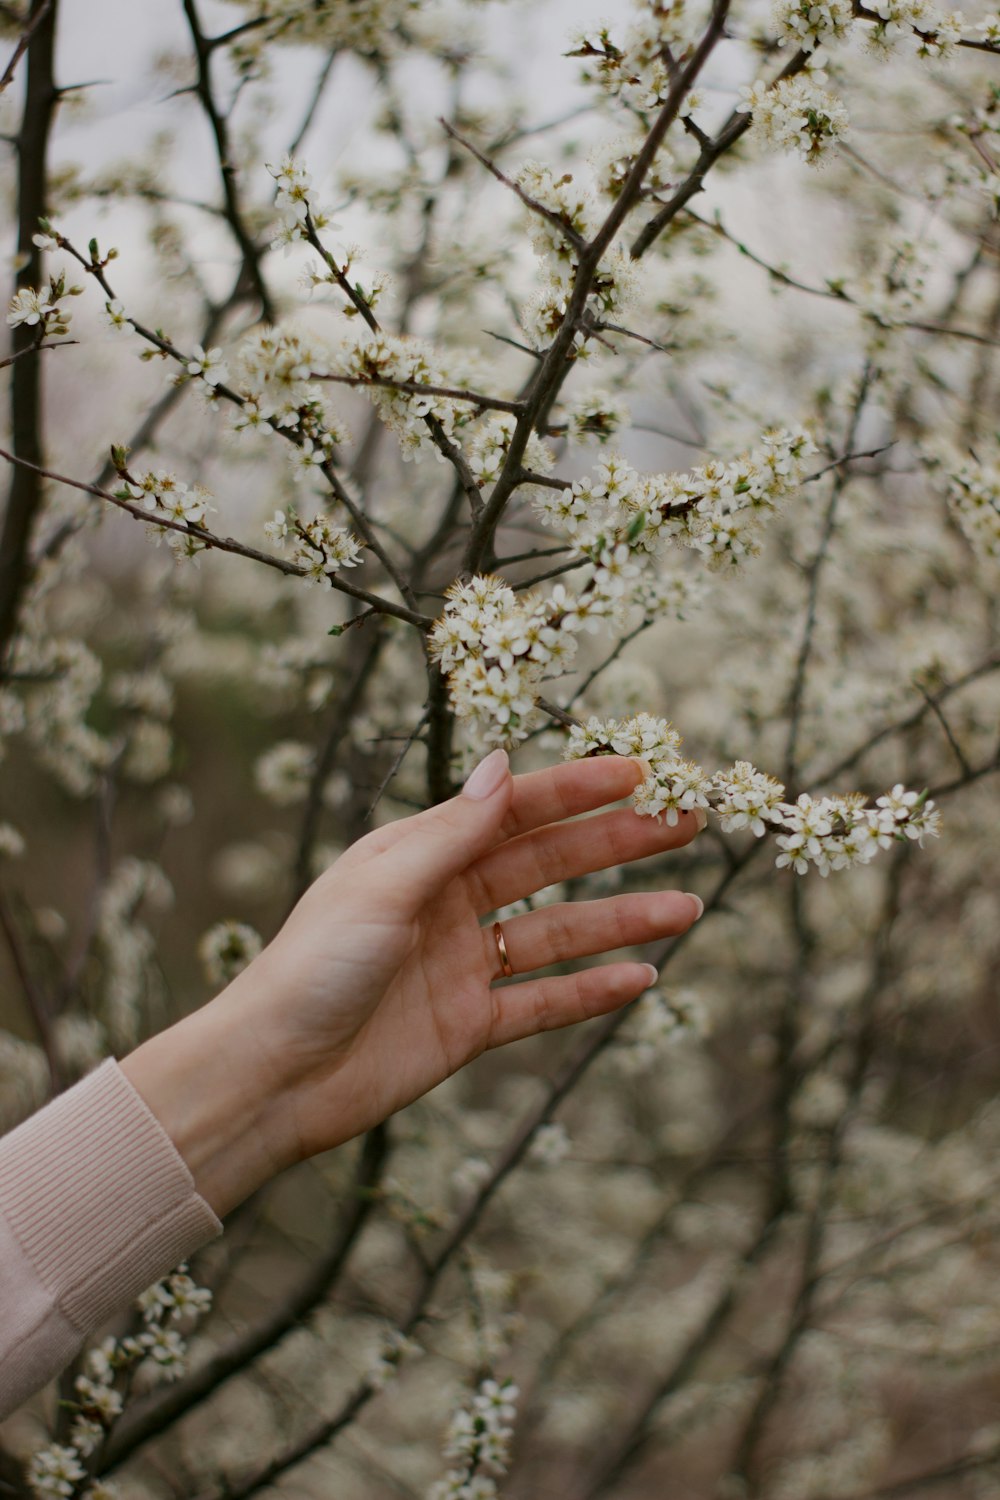 a person's hand reaching for a flower on a tree